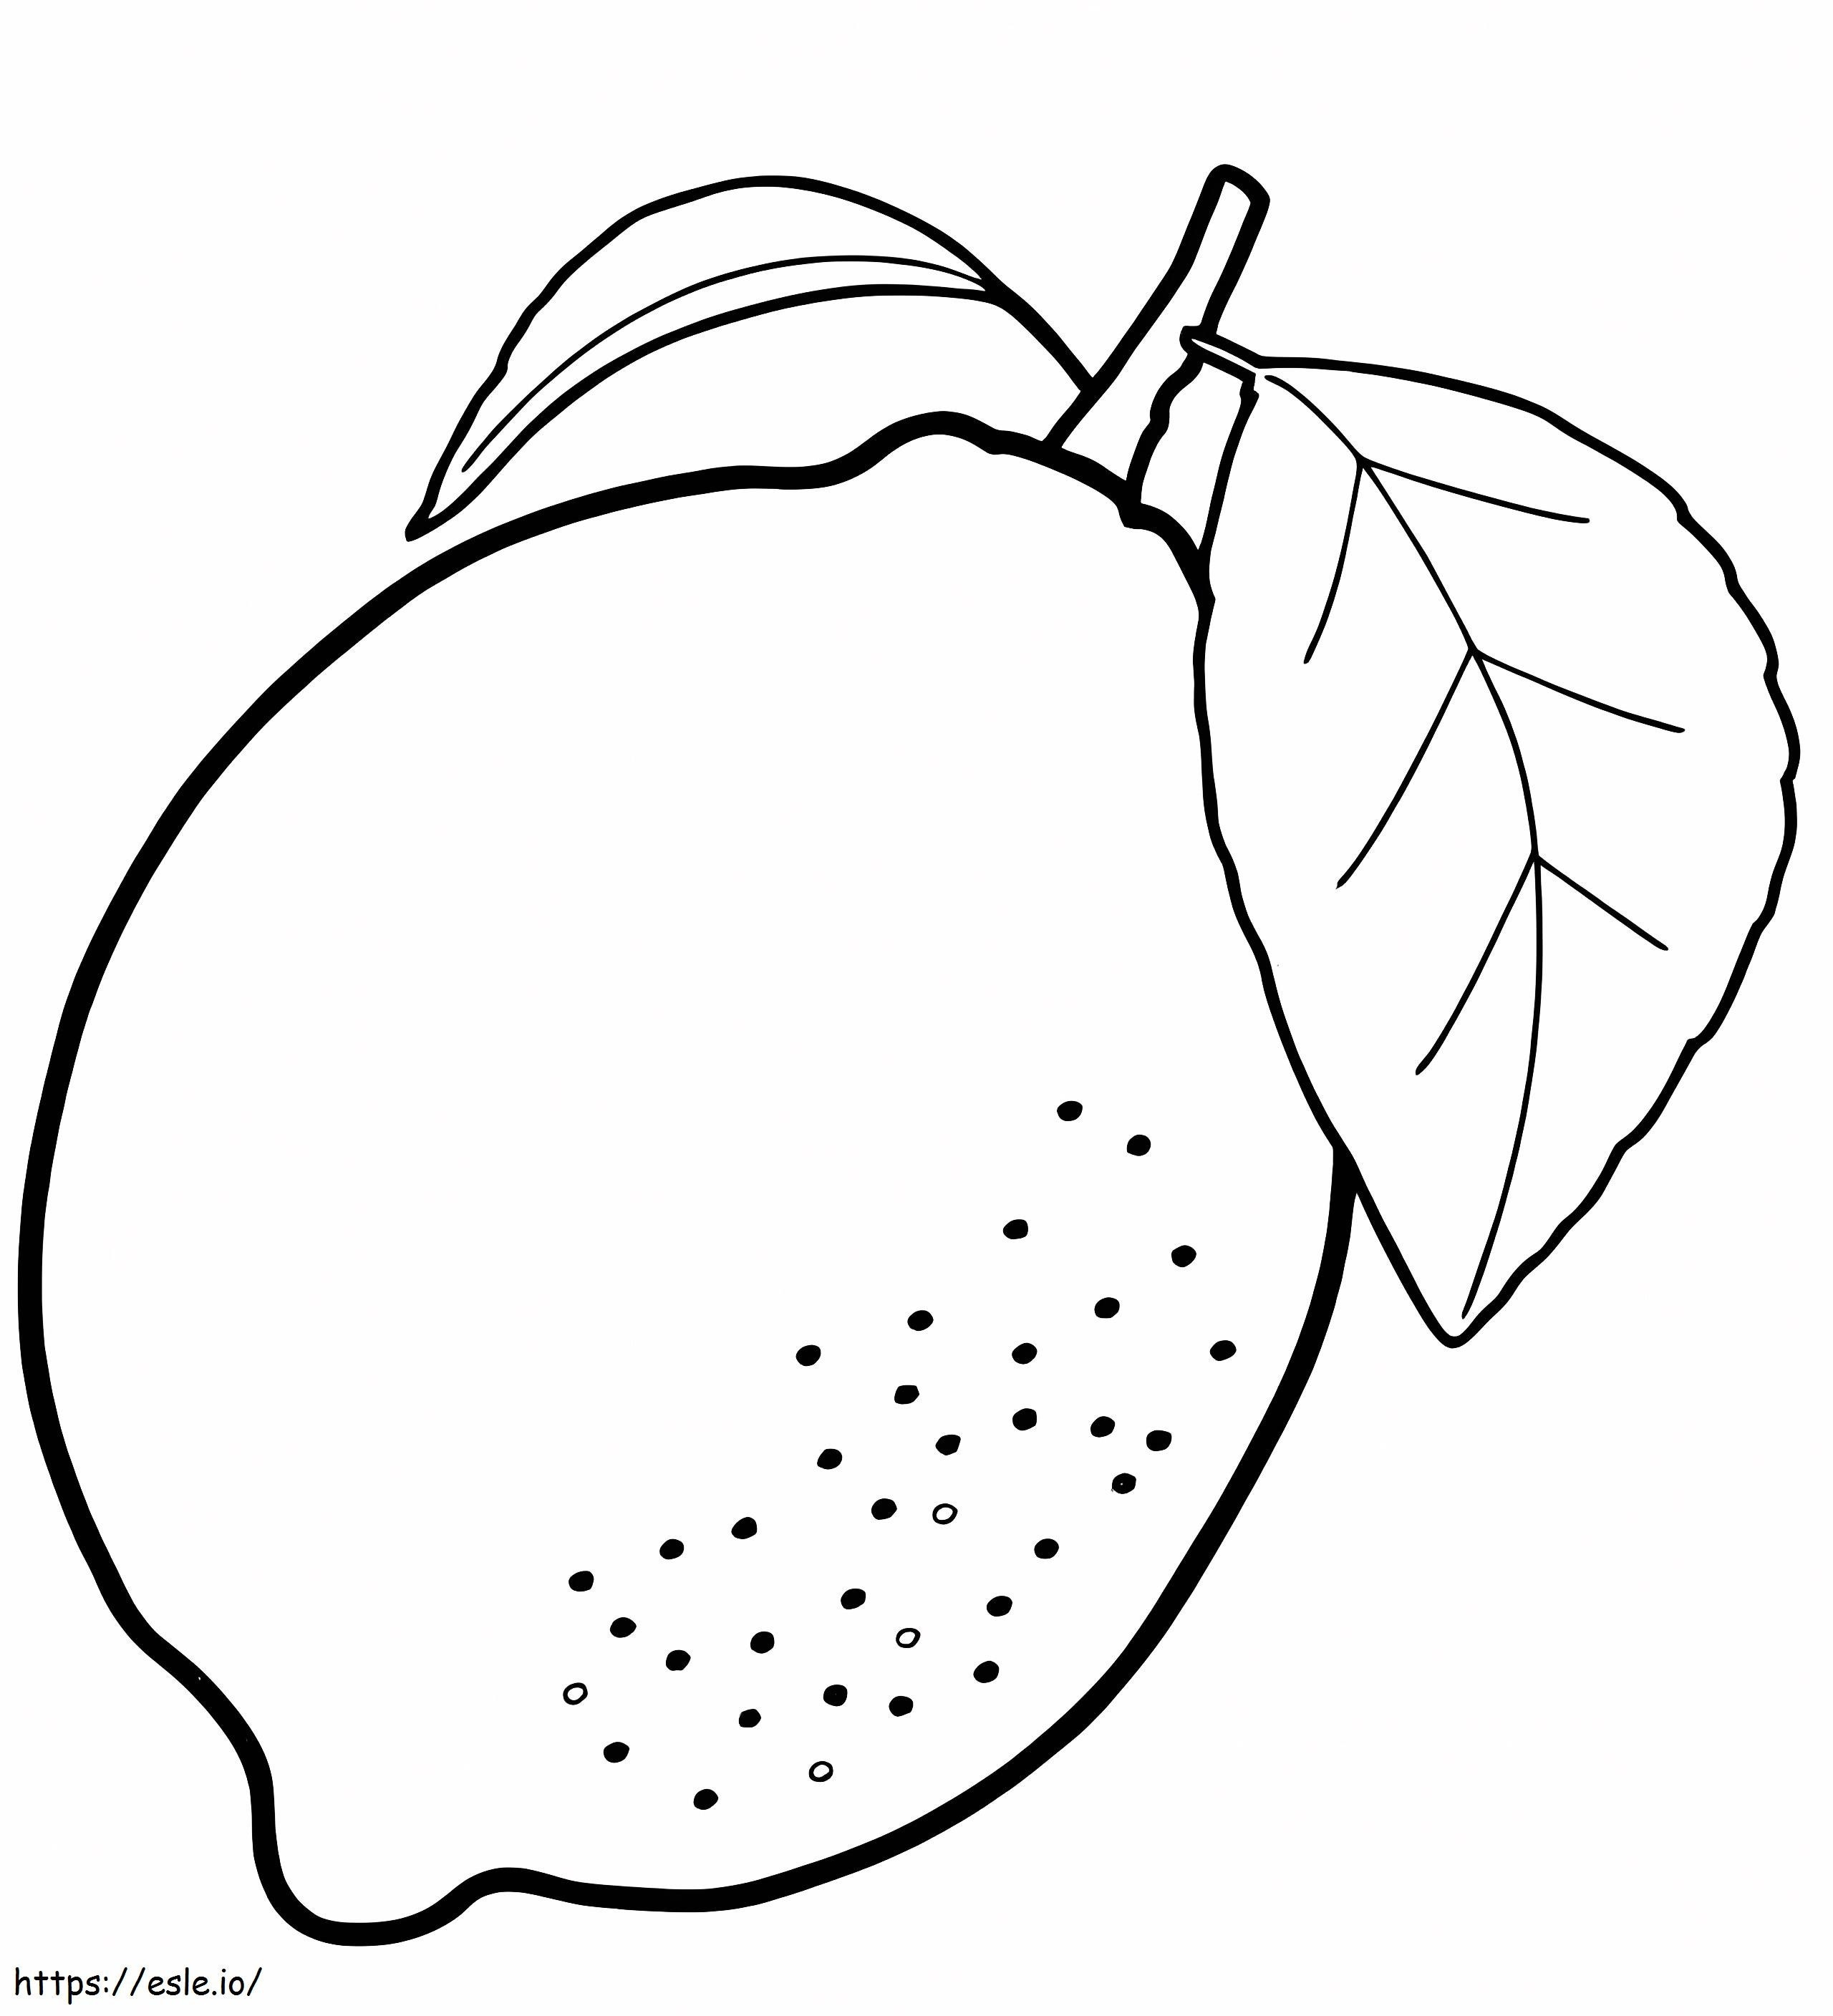 A Lemon With Leaf coloring page